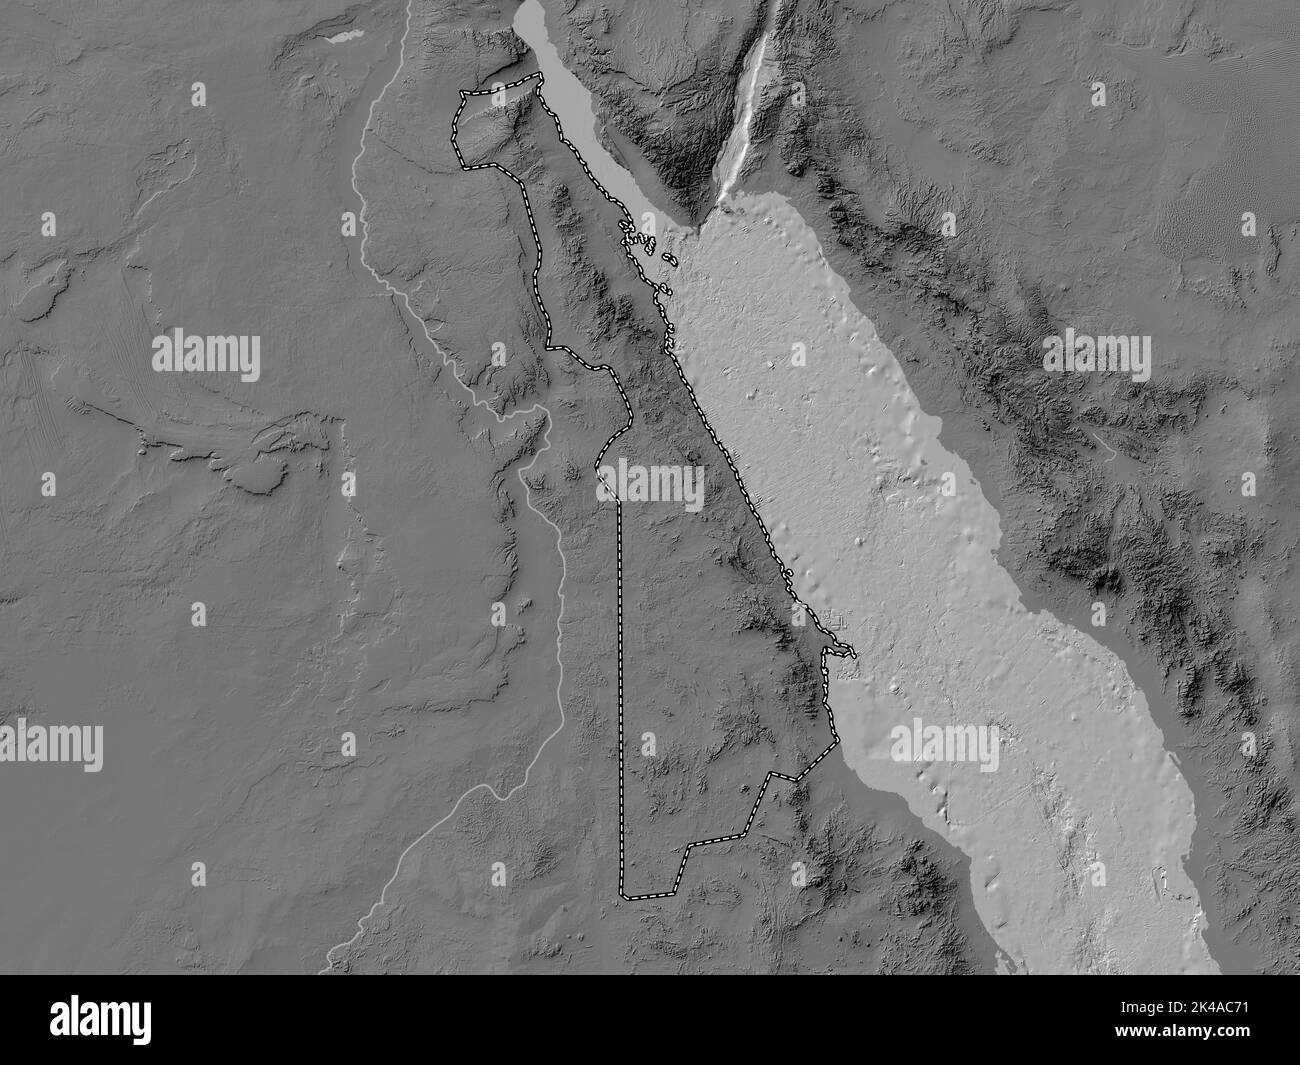 Al Bahr al Ahmar, governorate of Egypt. Bilevel elevation map with lakes and rivers Stock Photo